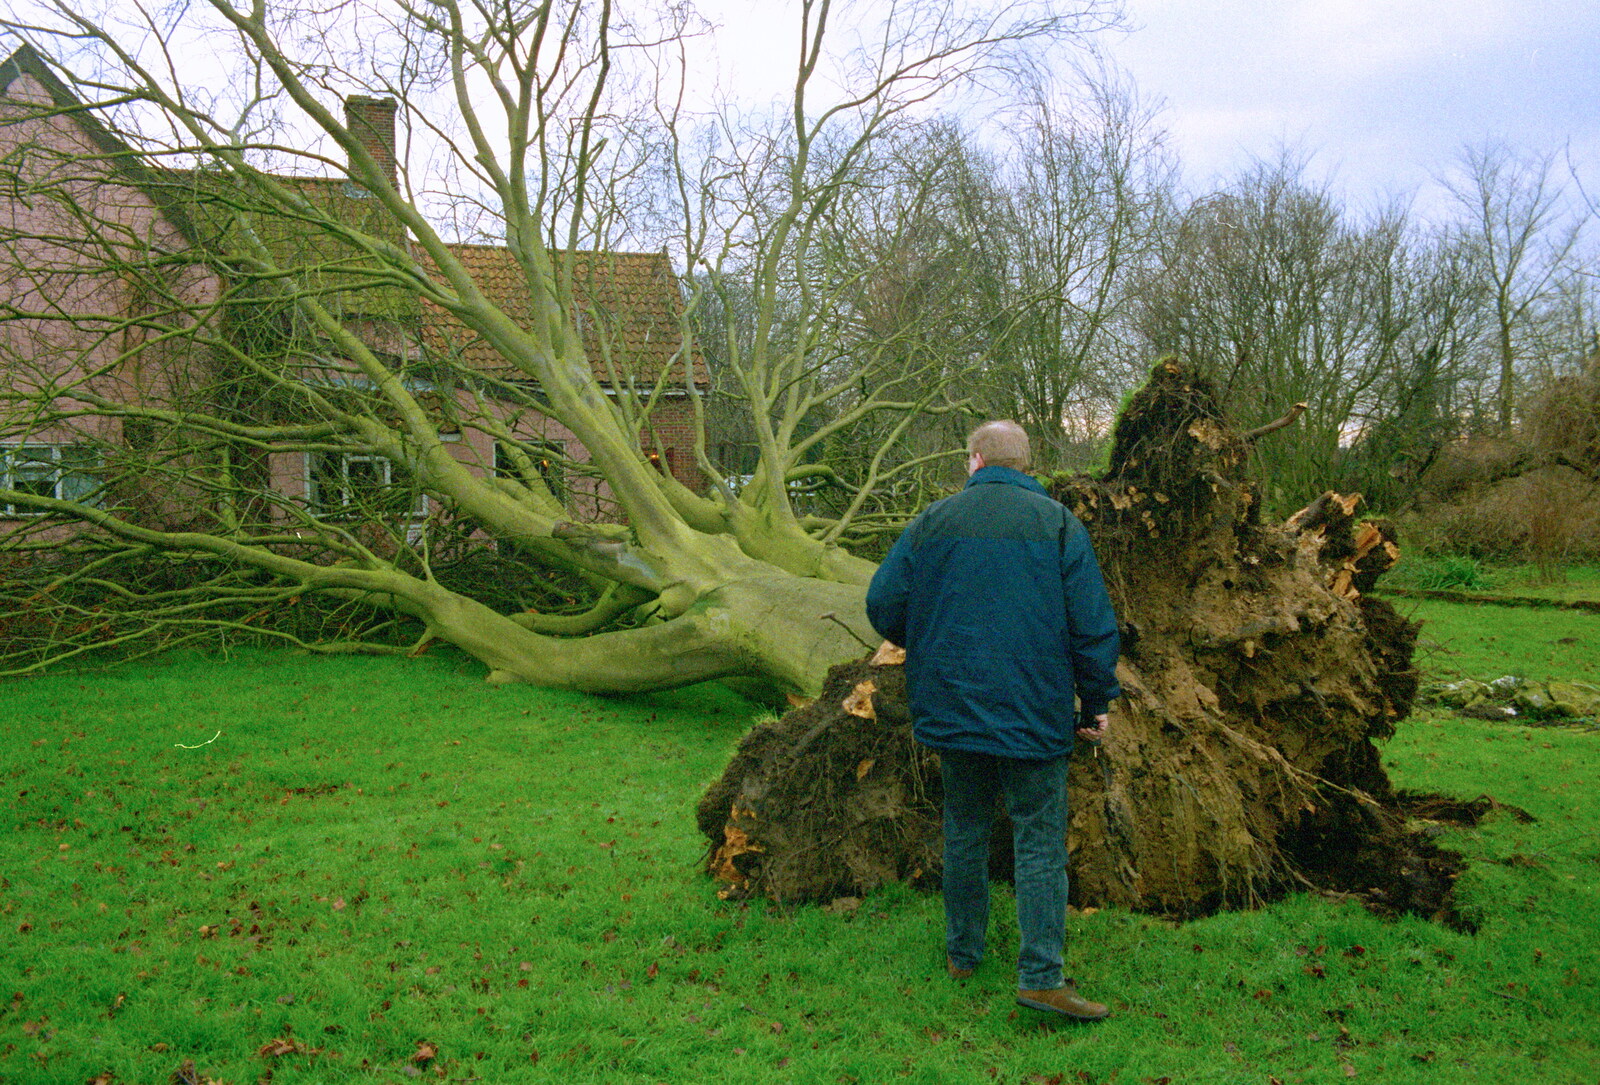 A Fallen Tree at The Swan, Brome, Suffolk - January 21st 2001: Ian inspects the stump